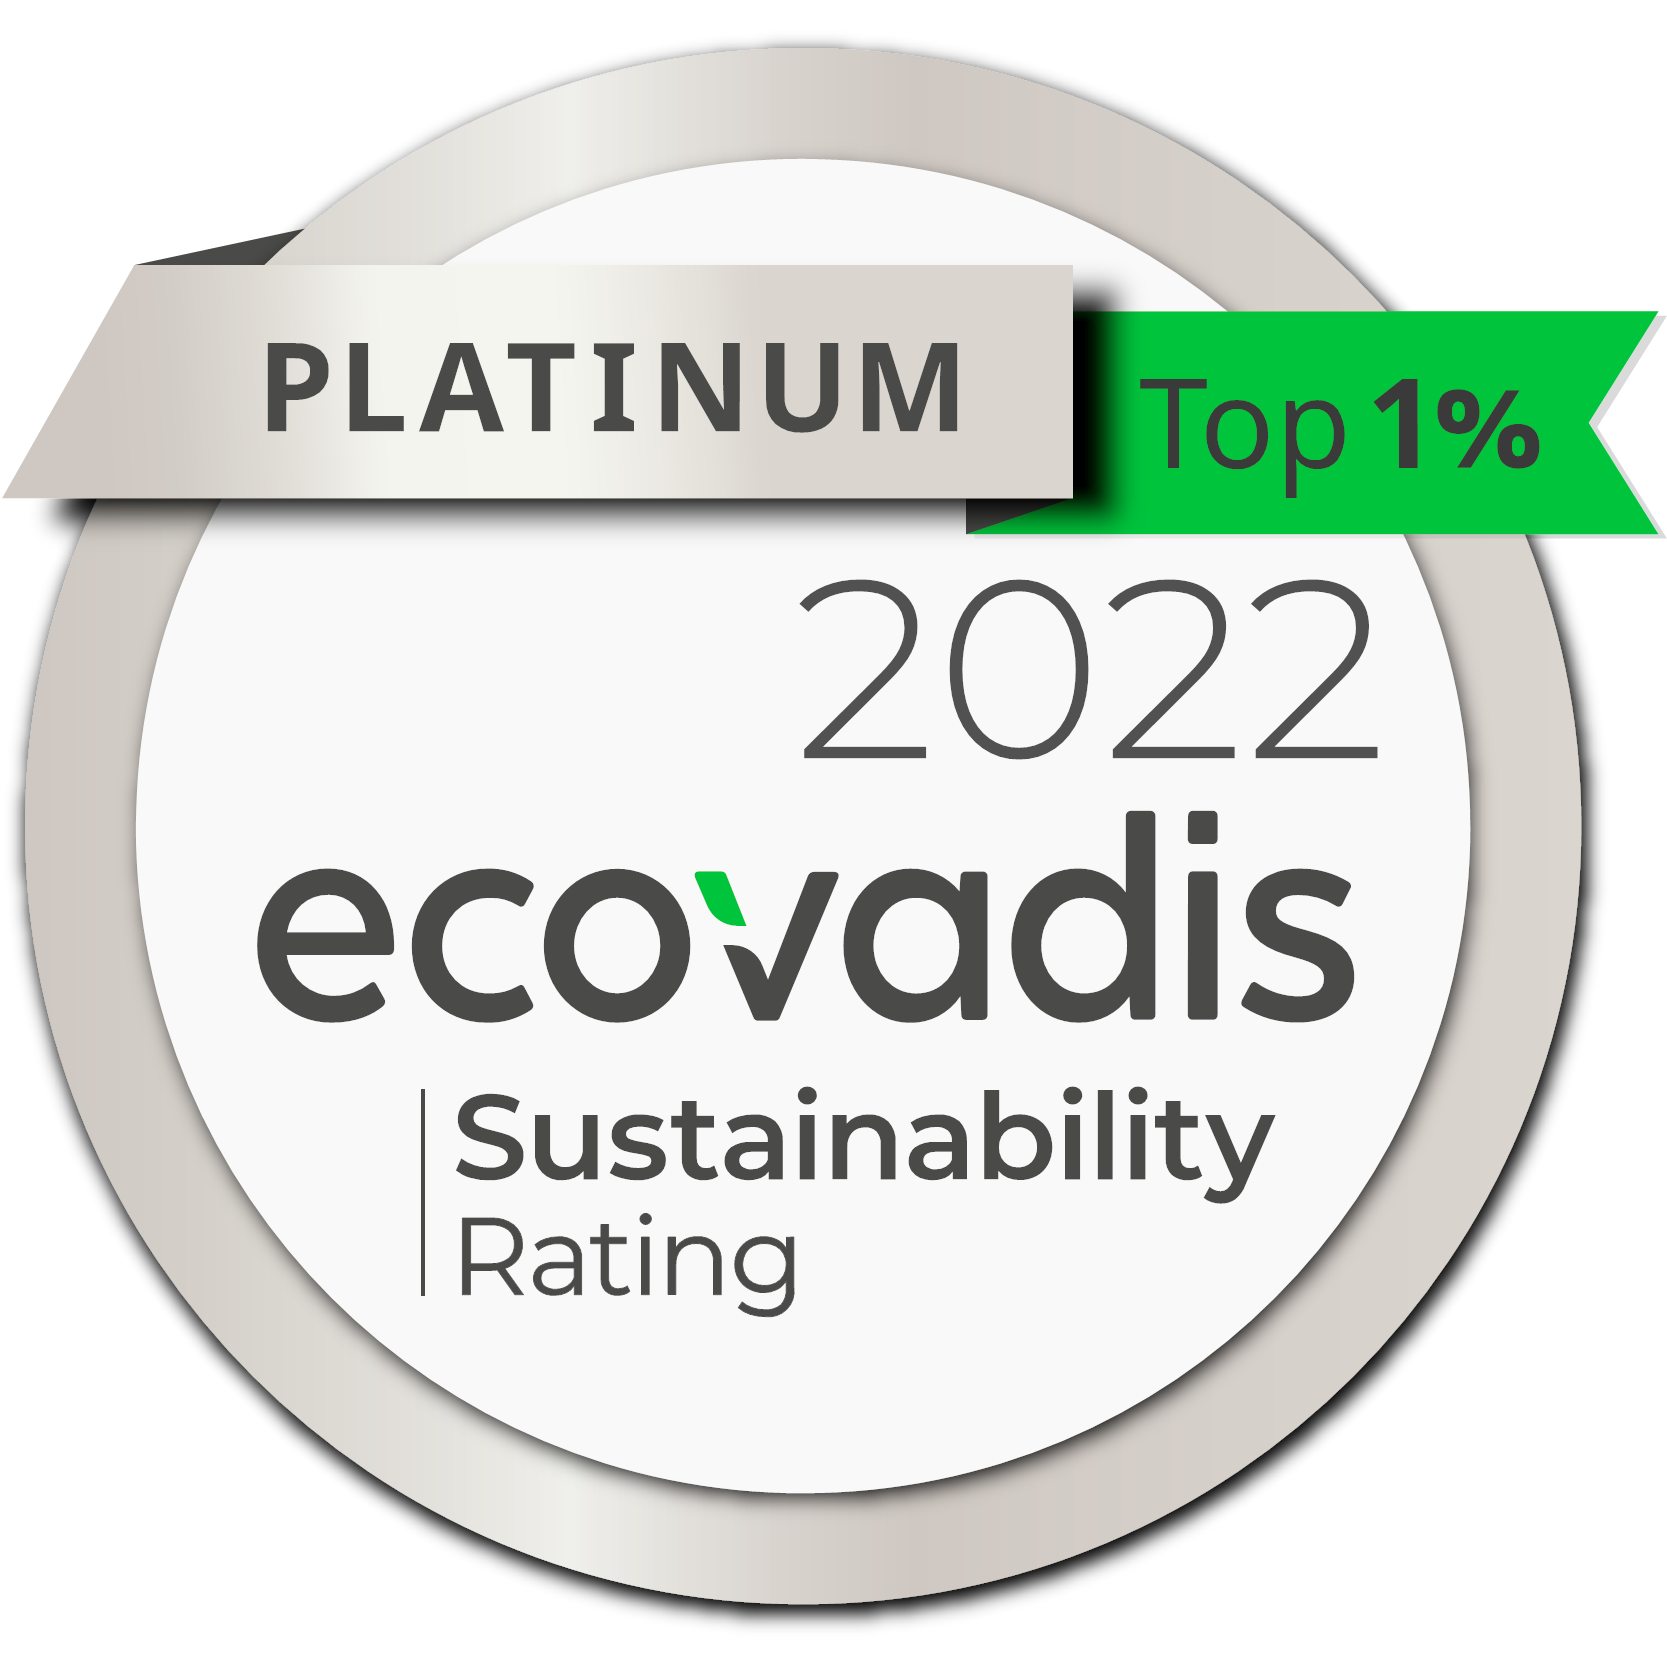 After receiveing Gold for four consecutive years, ALD Automotive Switzerland receives the Platinum EcoVadis certification for sustainability